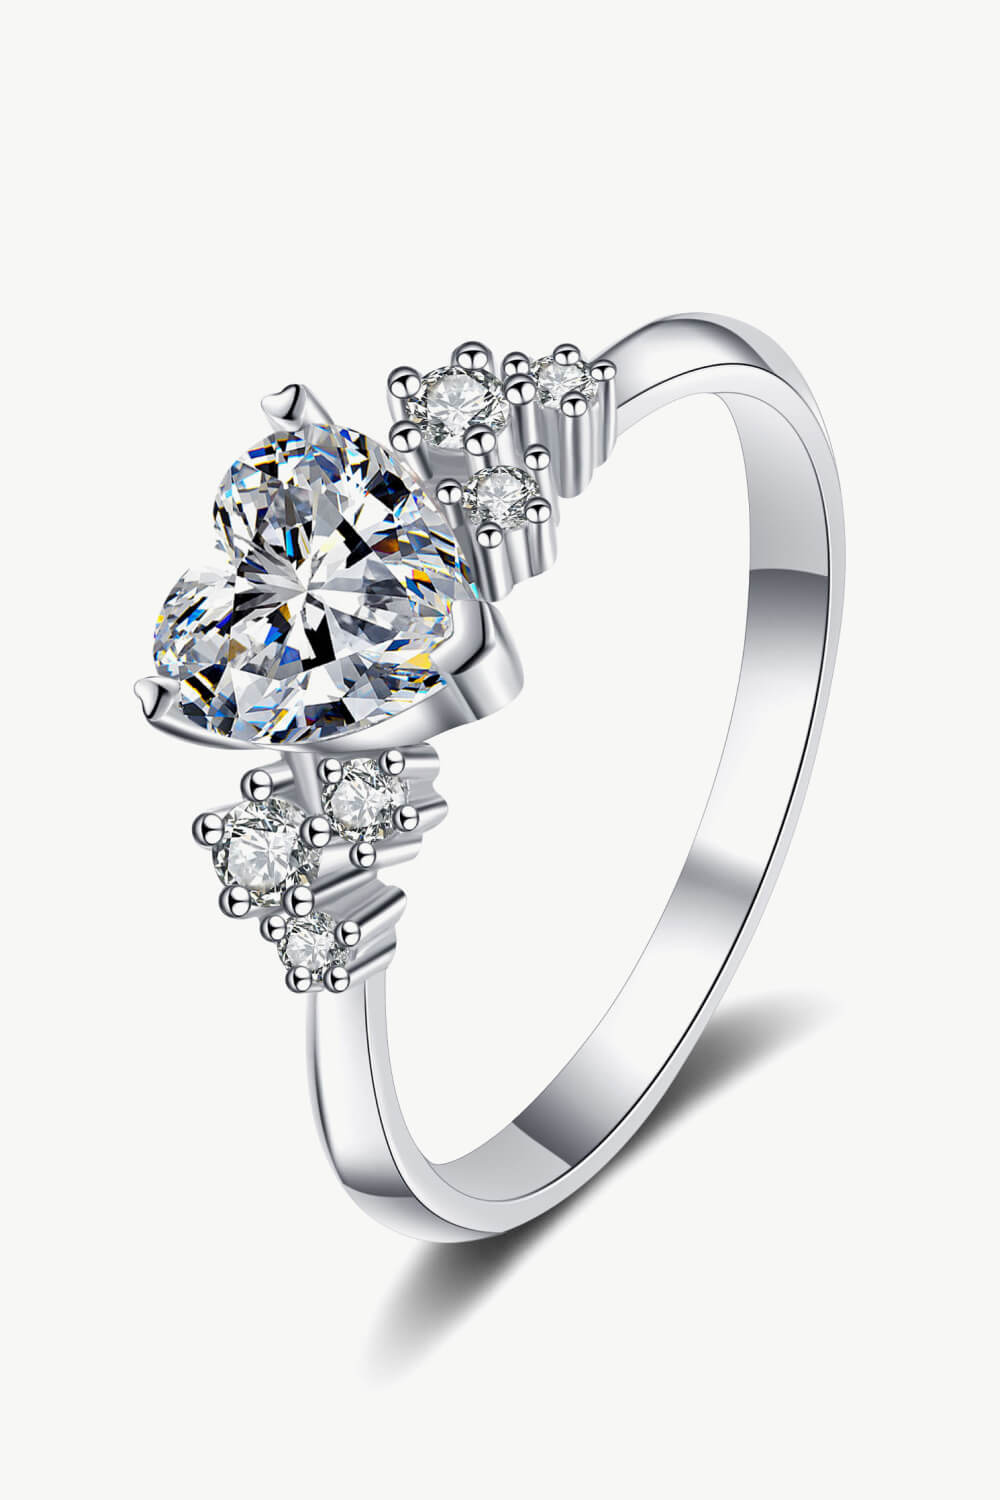 Love You So Much 1 Carat Moissanite Heart Ring